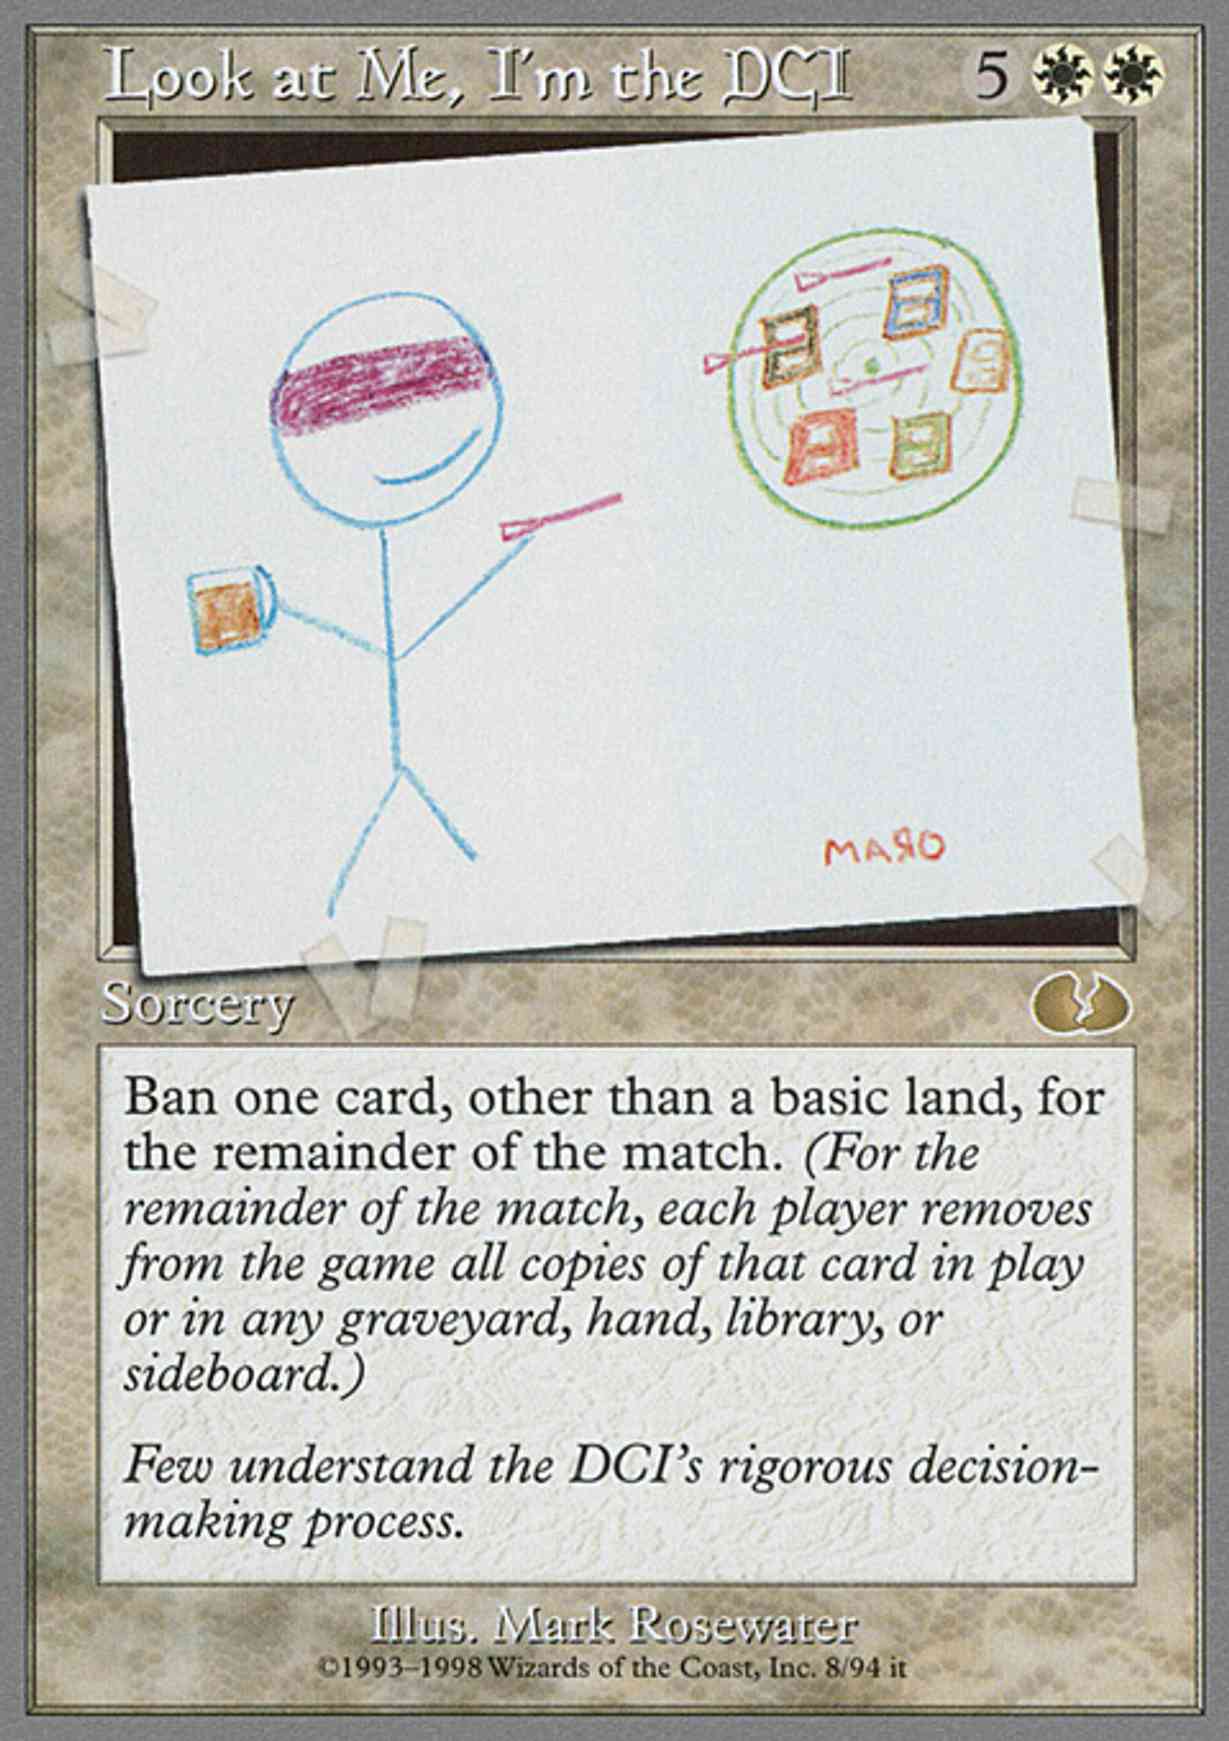 Look at Me, I'm the DCI magic card front